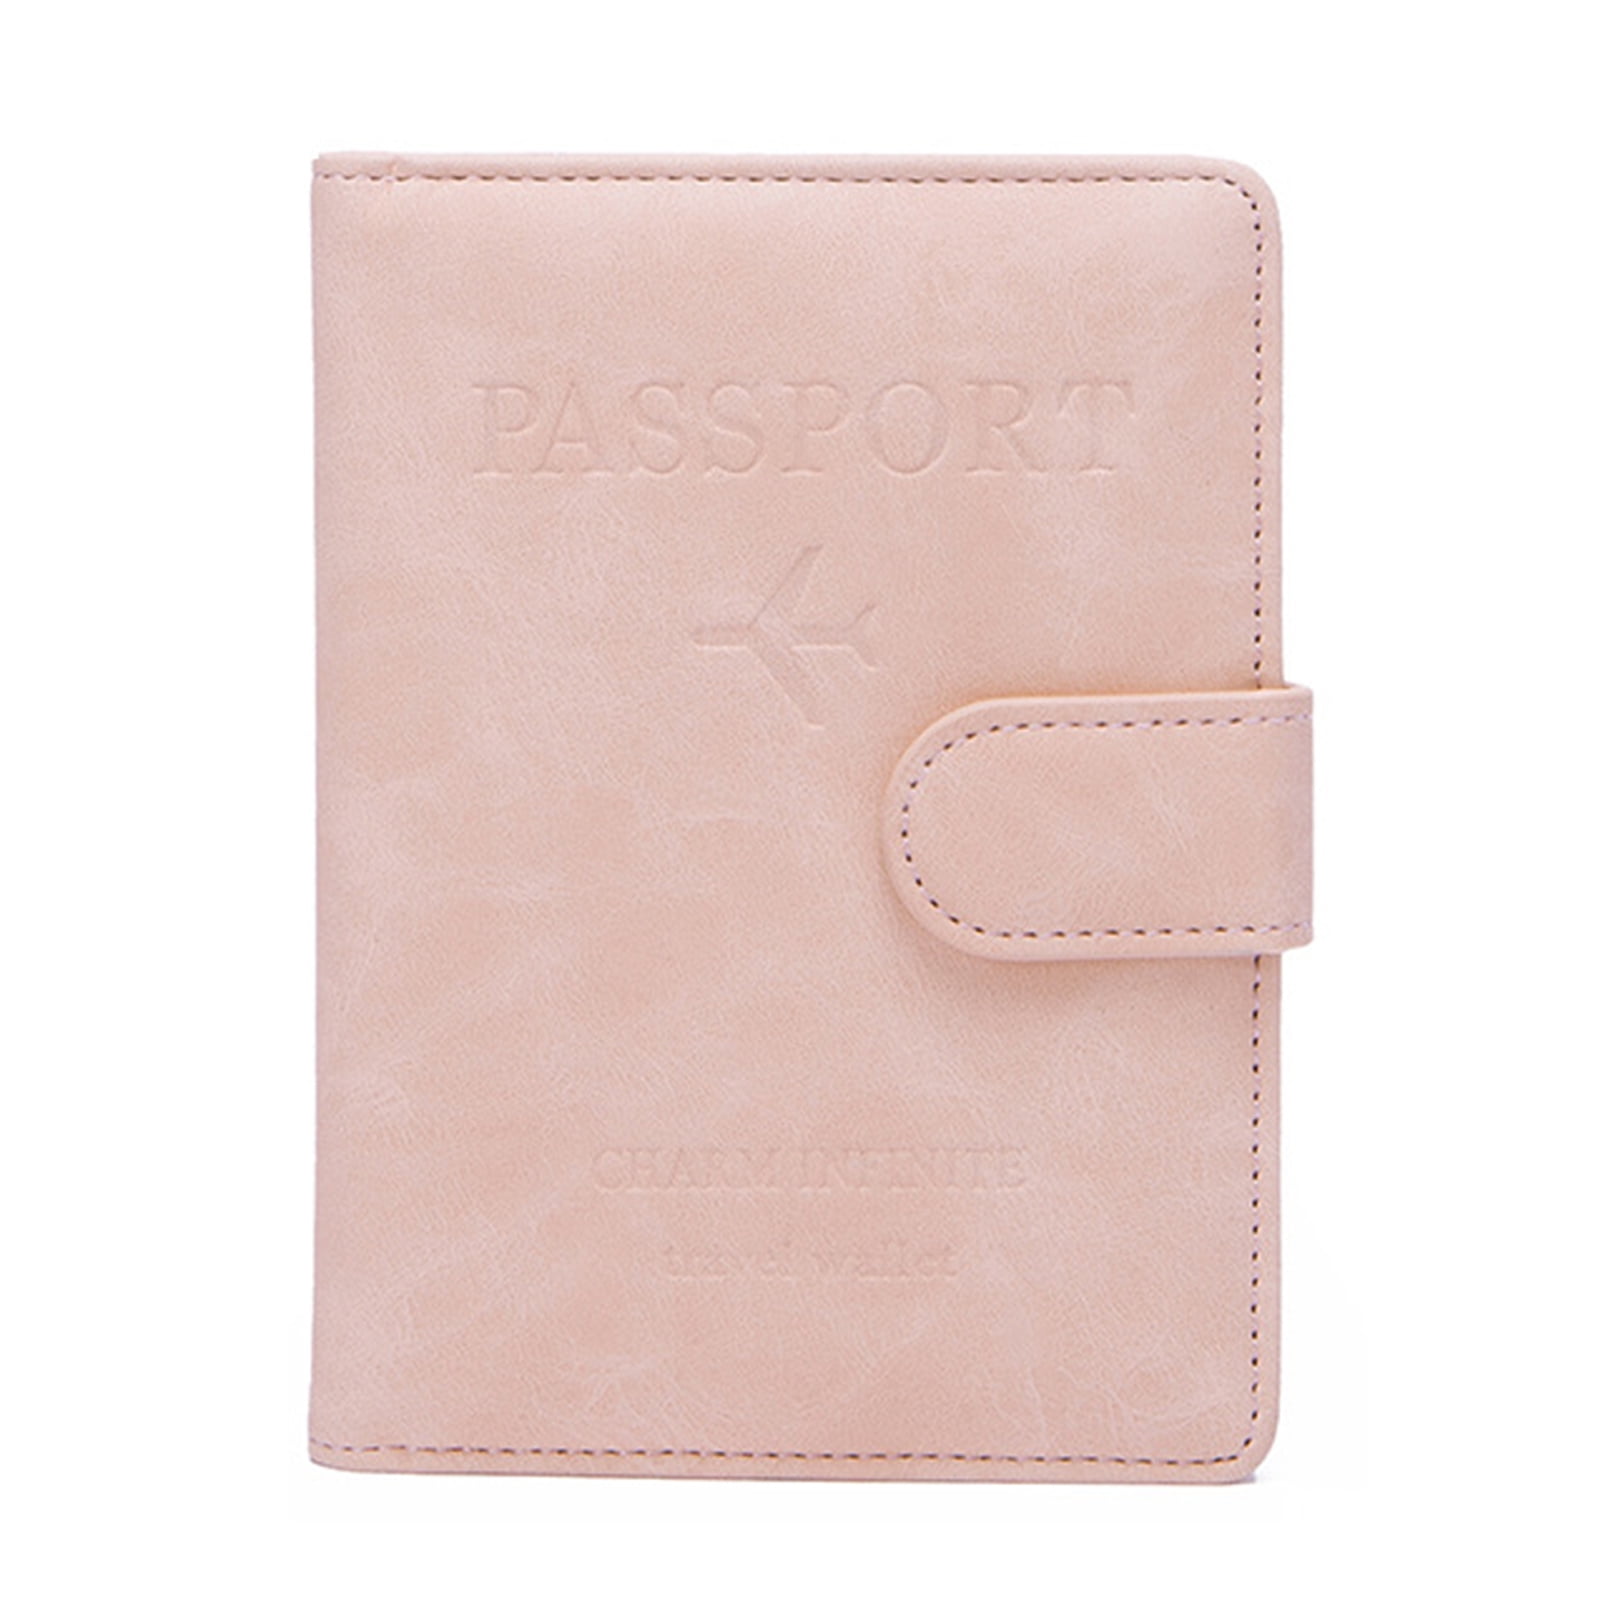 Passport Case For Women Asian Style Holiday Blessing Fan Stylish Pu Leather Travel Accessories Passport Carrying Case For Women Men